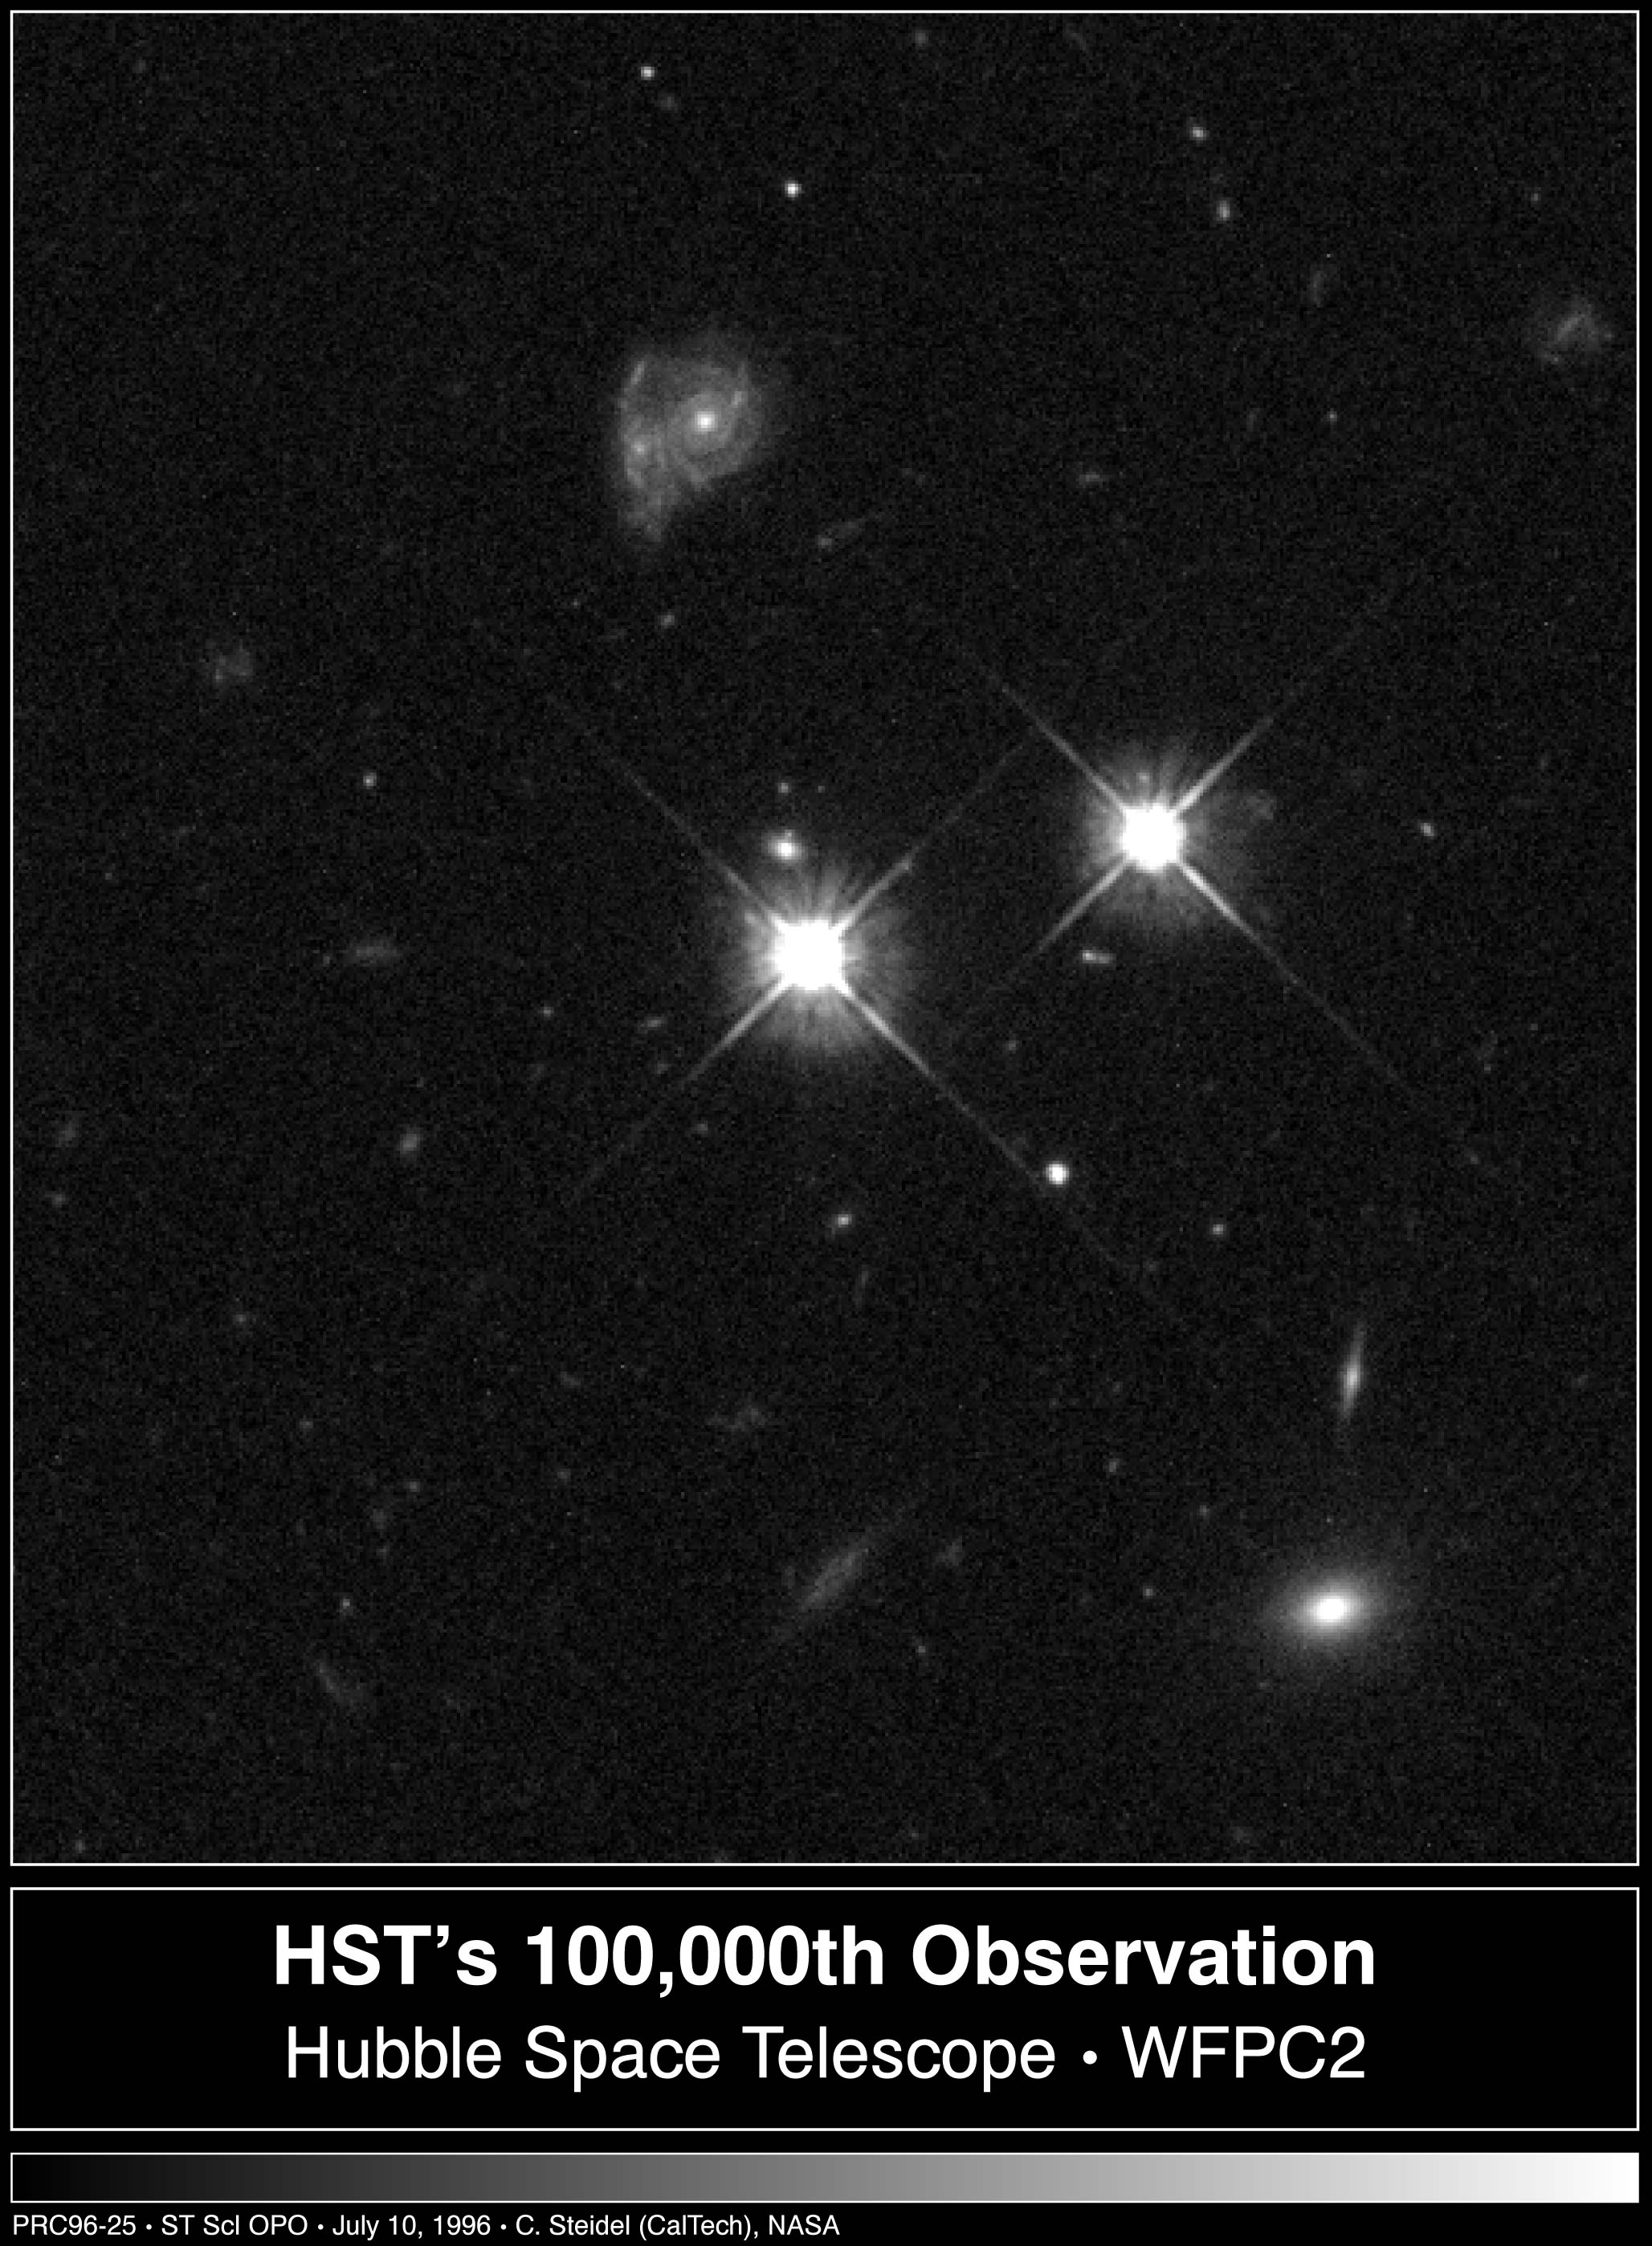 Black and white image. Two bright points of light, one at image center, the other slightly above and to the right. Top center of the image holds 2 galaxies together, at least one is a spiral.